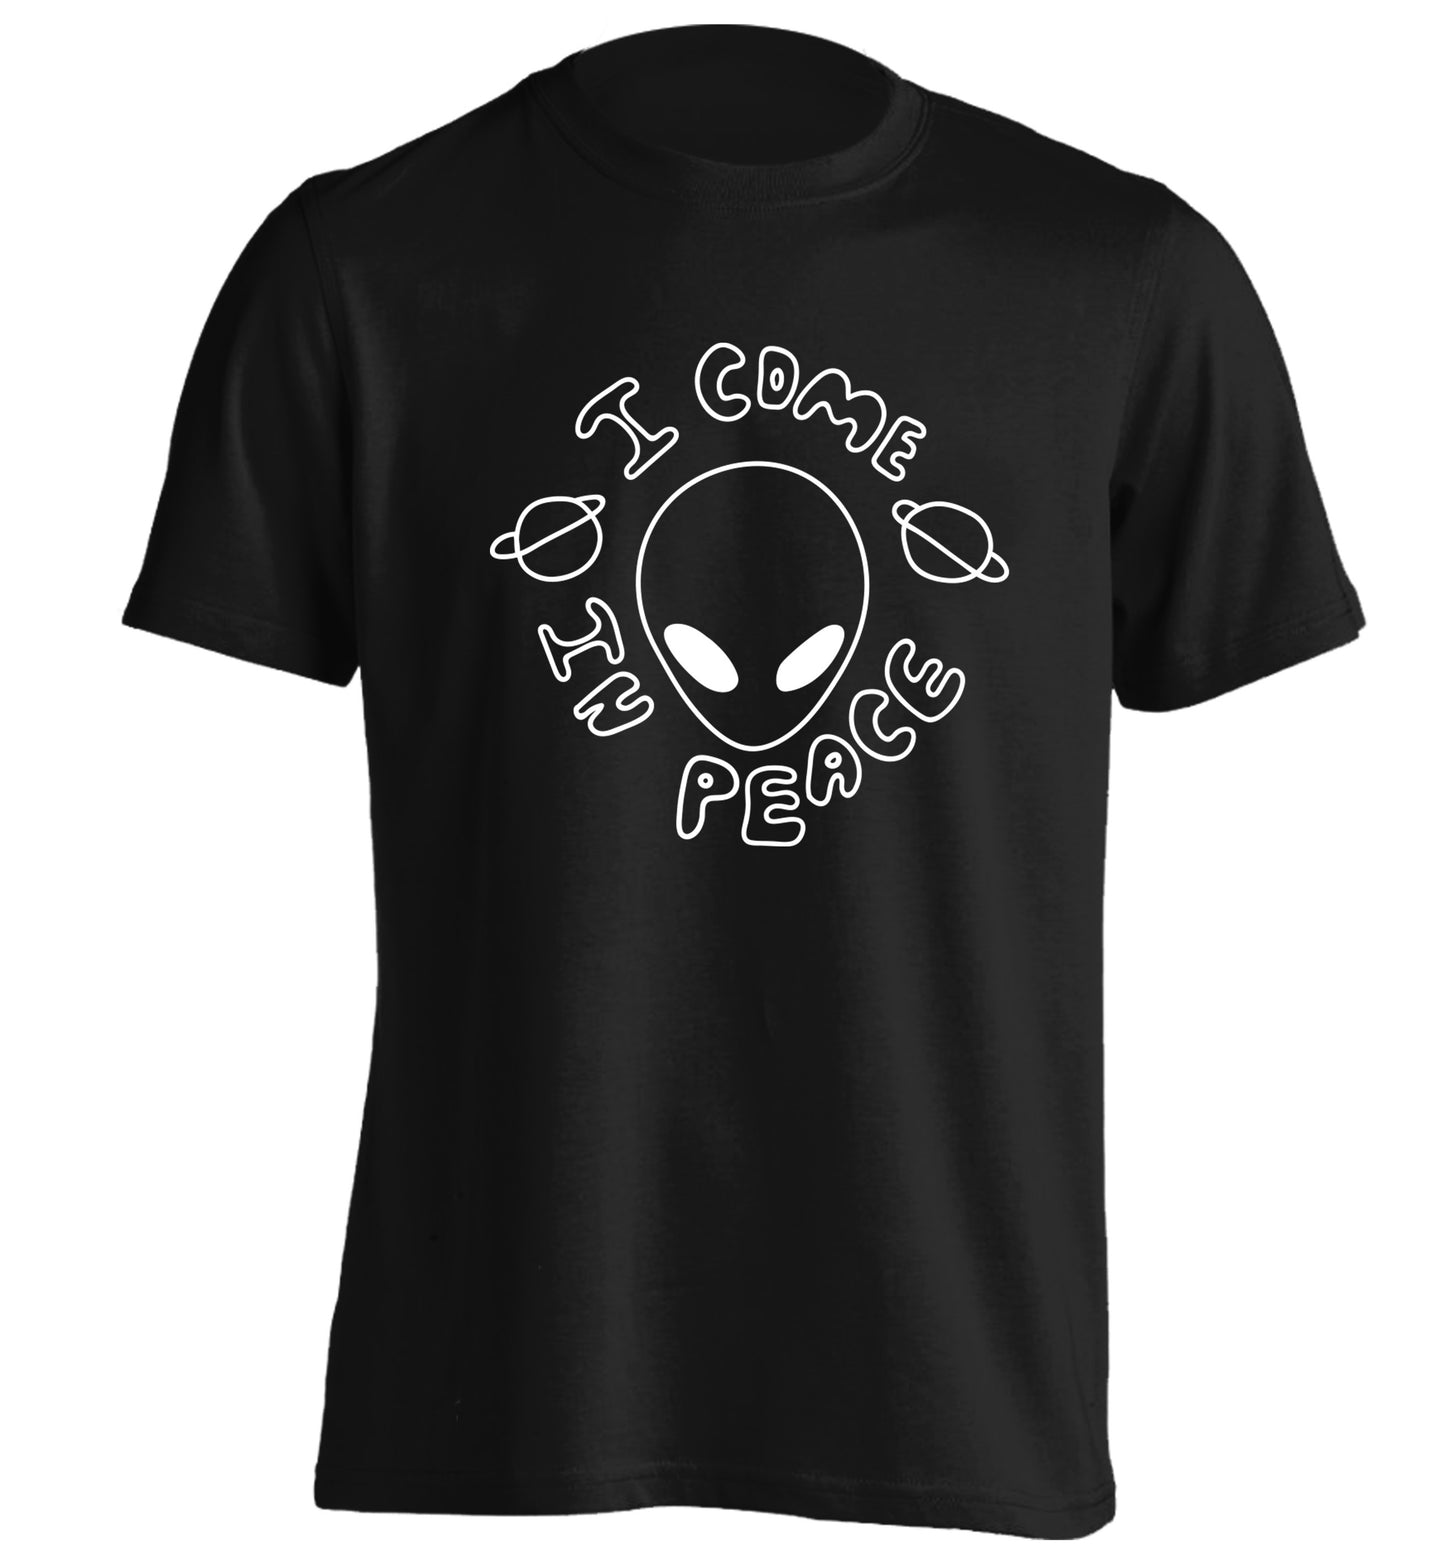 I come in peace adults unisex black Tshirt 2XL